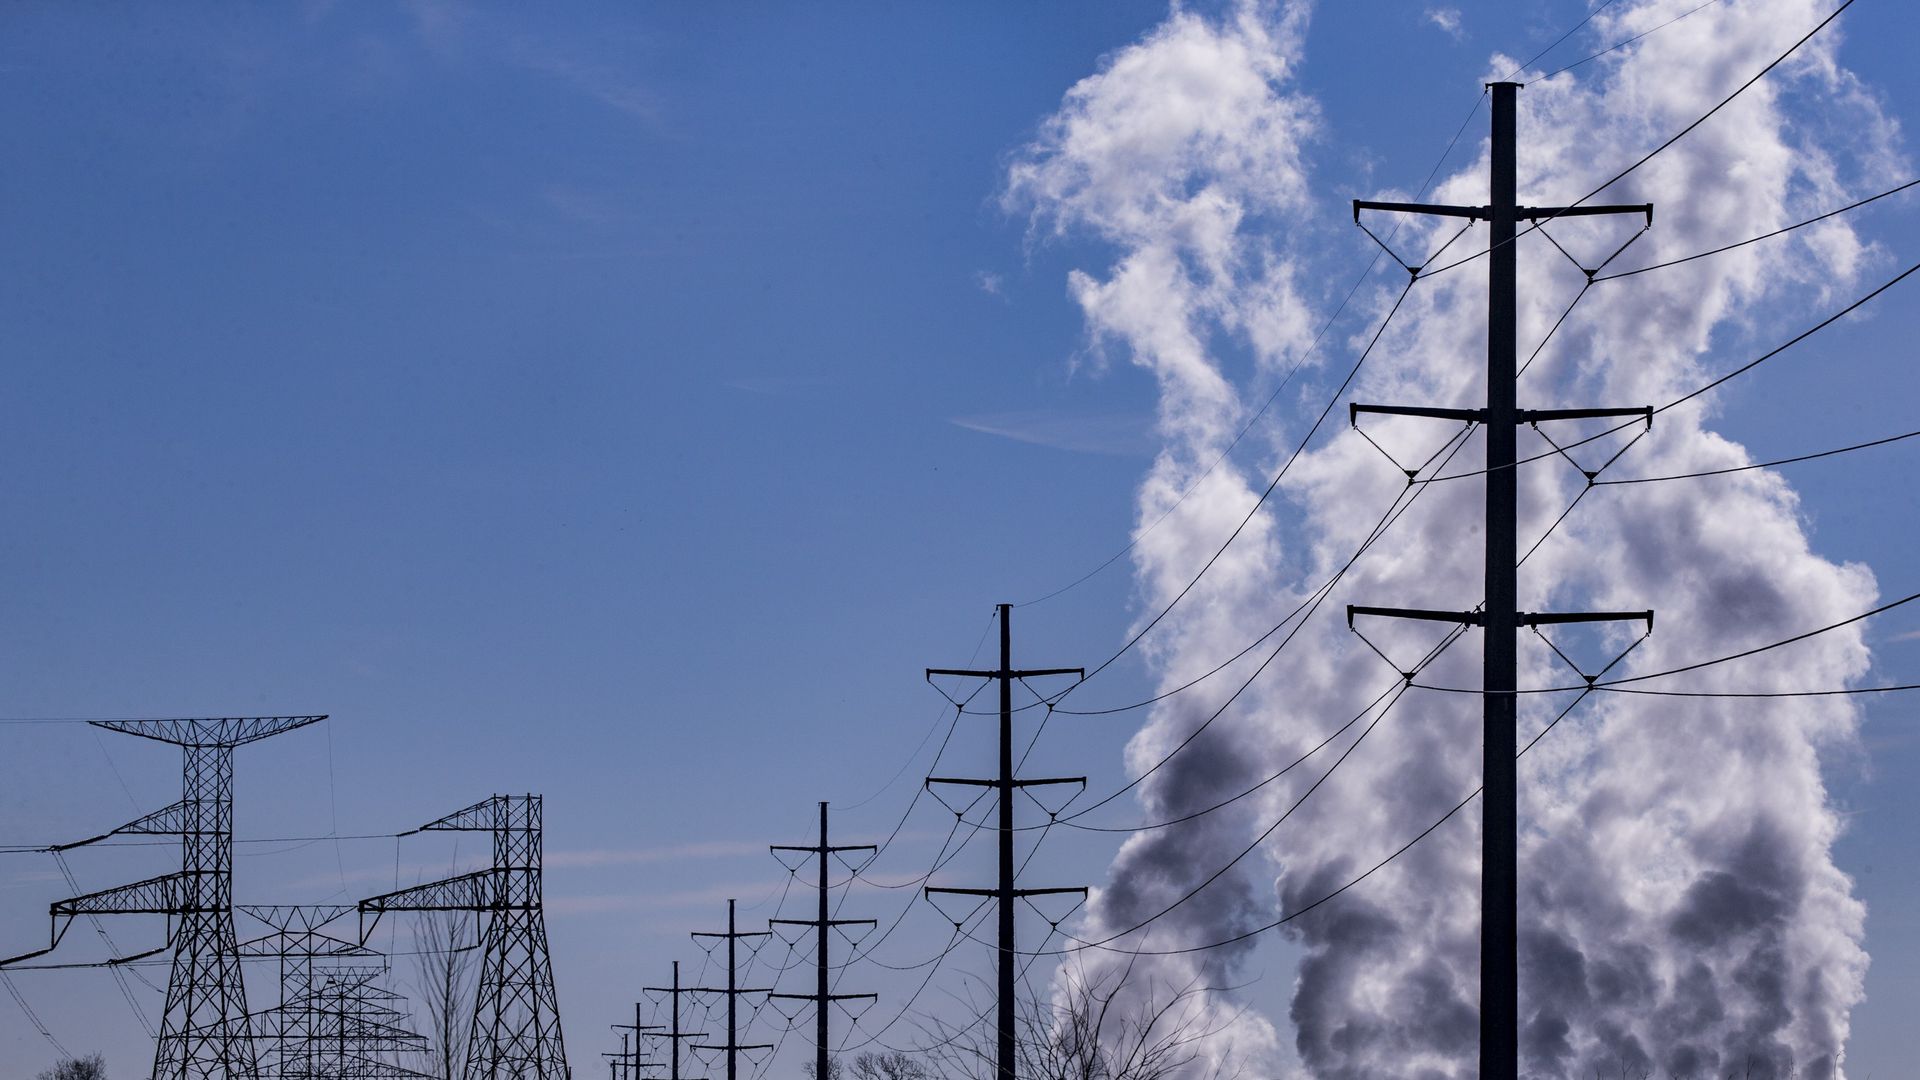 Smoke rises above a natural gas power plant outside of Dallas, Texas, on January 04, 2018.